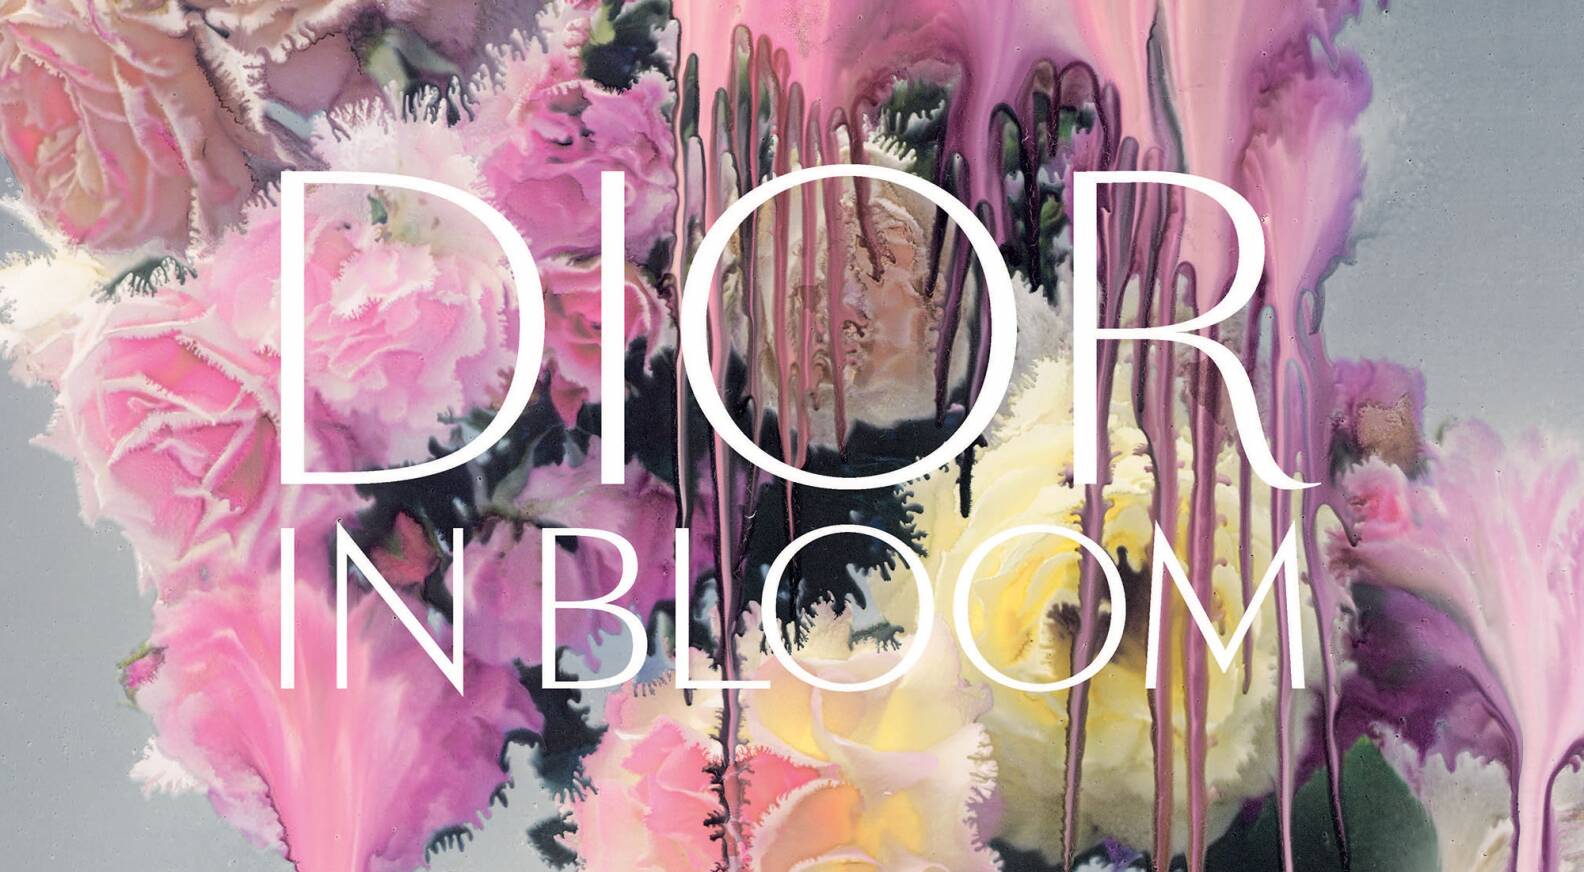 Dior in Bloom” book recounts the Maison 